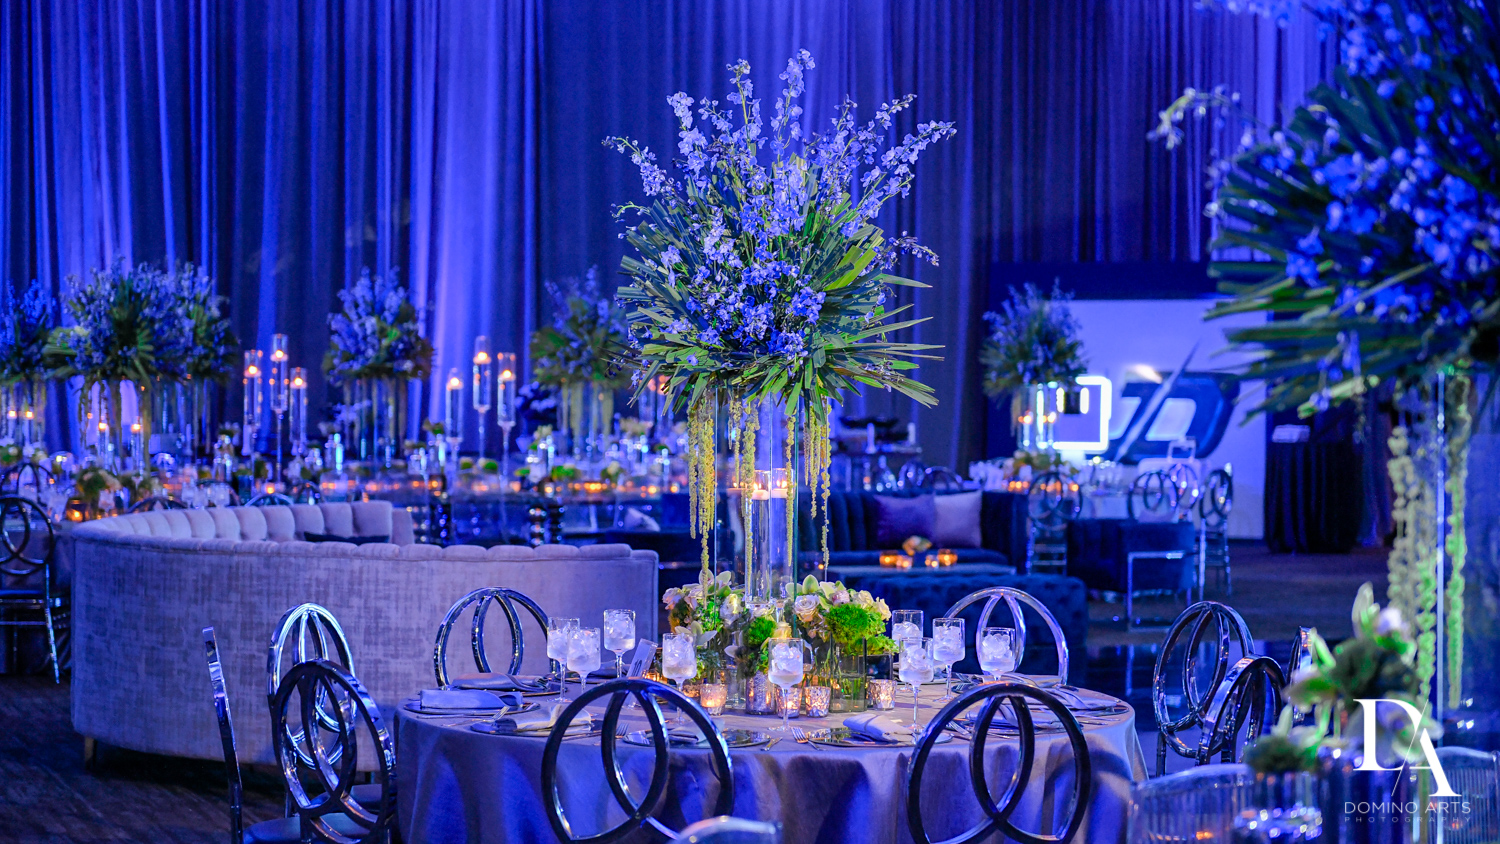 Amazing decor at Modern All Blue Decor Bar Mitzvah at Temple Beth Am Pinecrest by Domino Arts Photography